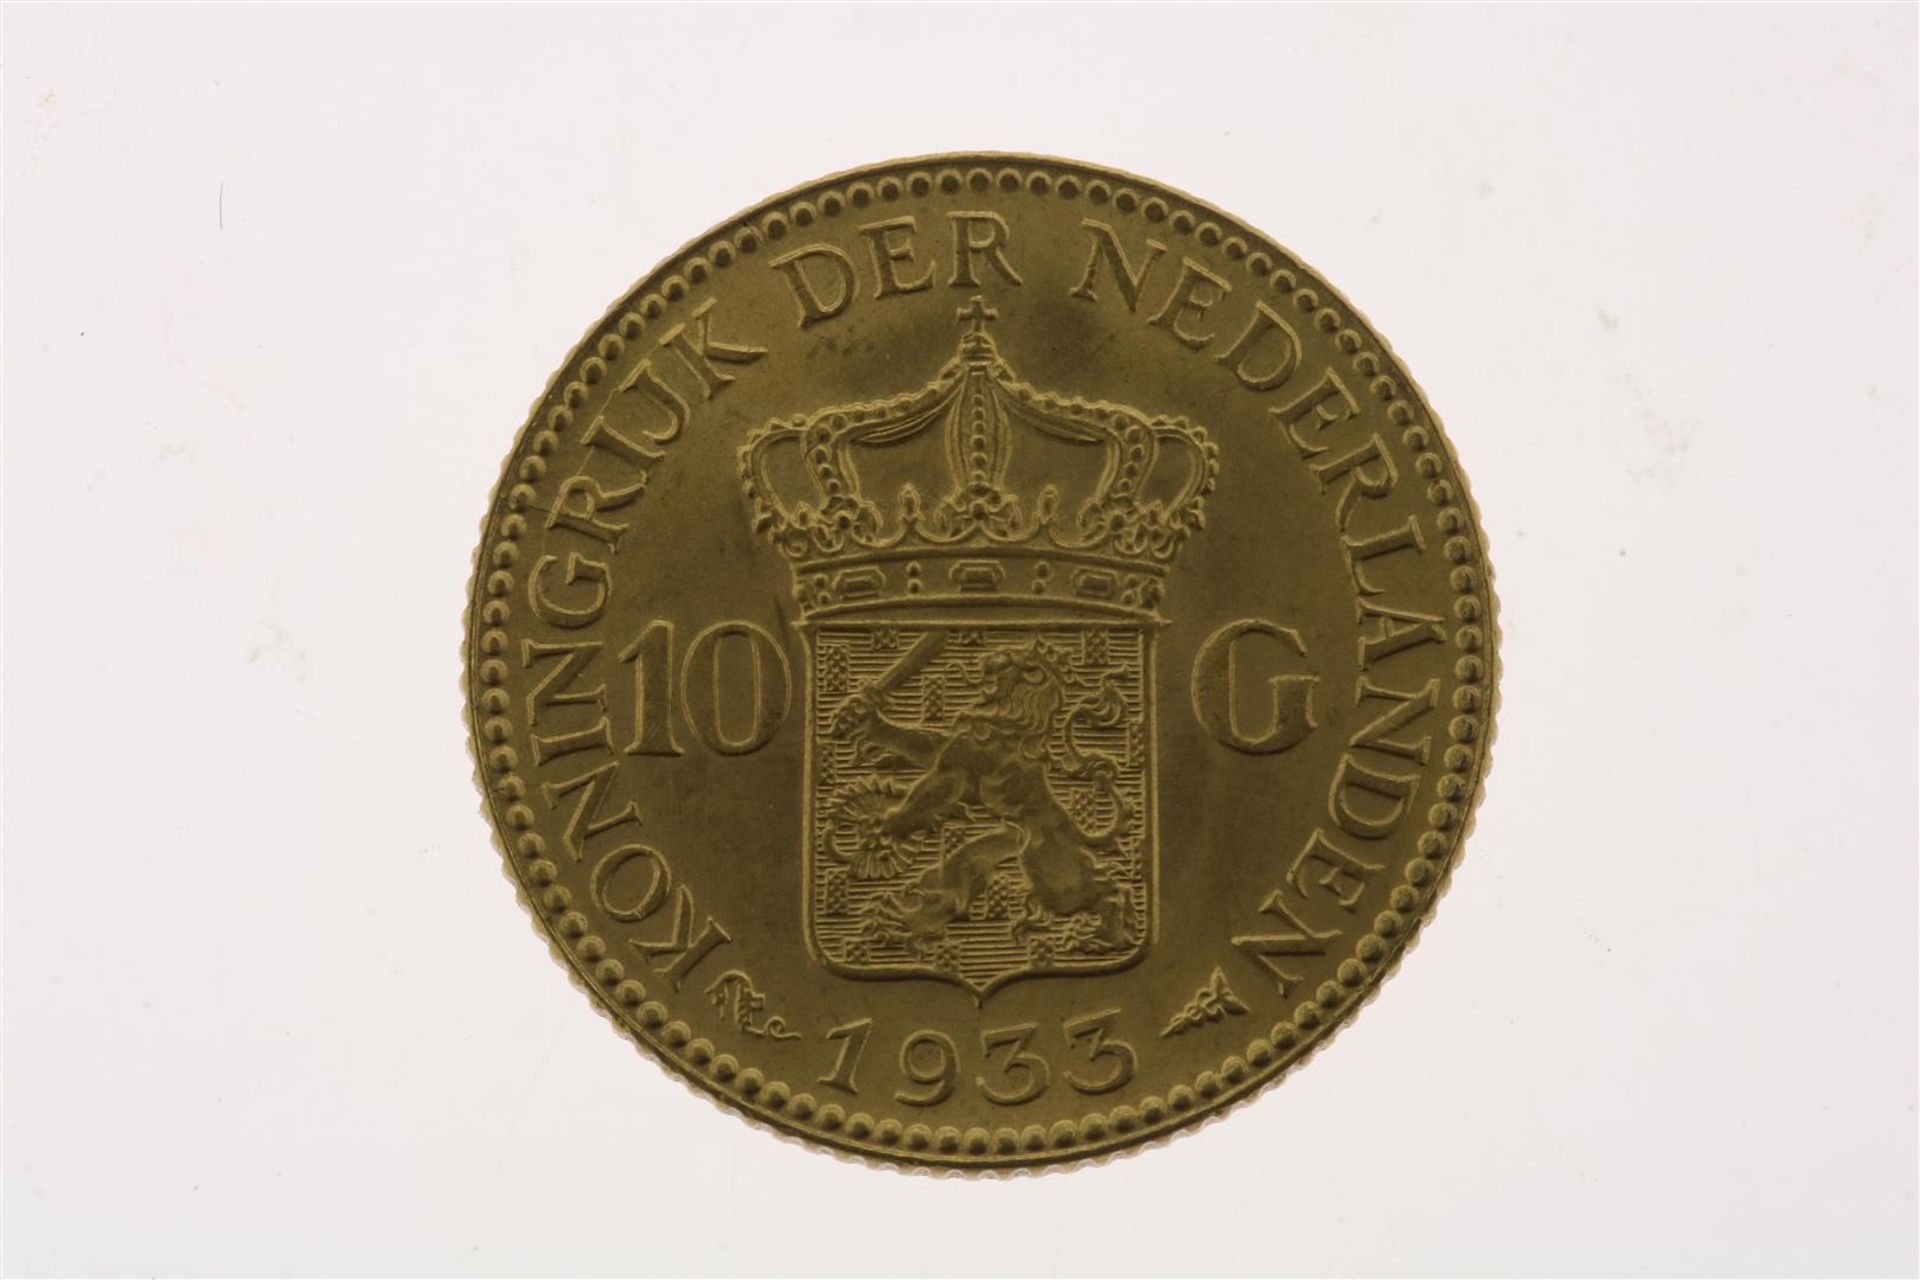 Gold tenner with image of Wilhelmina with updo hair, in an ermine cloak, looking to the right, 1933, - Image 2 of 2